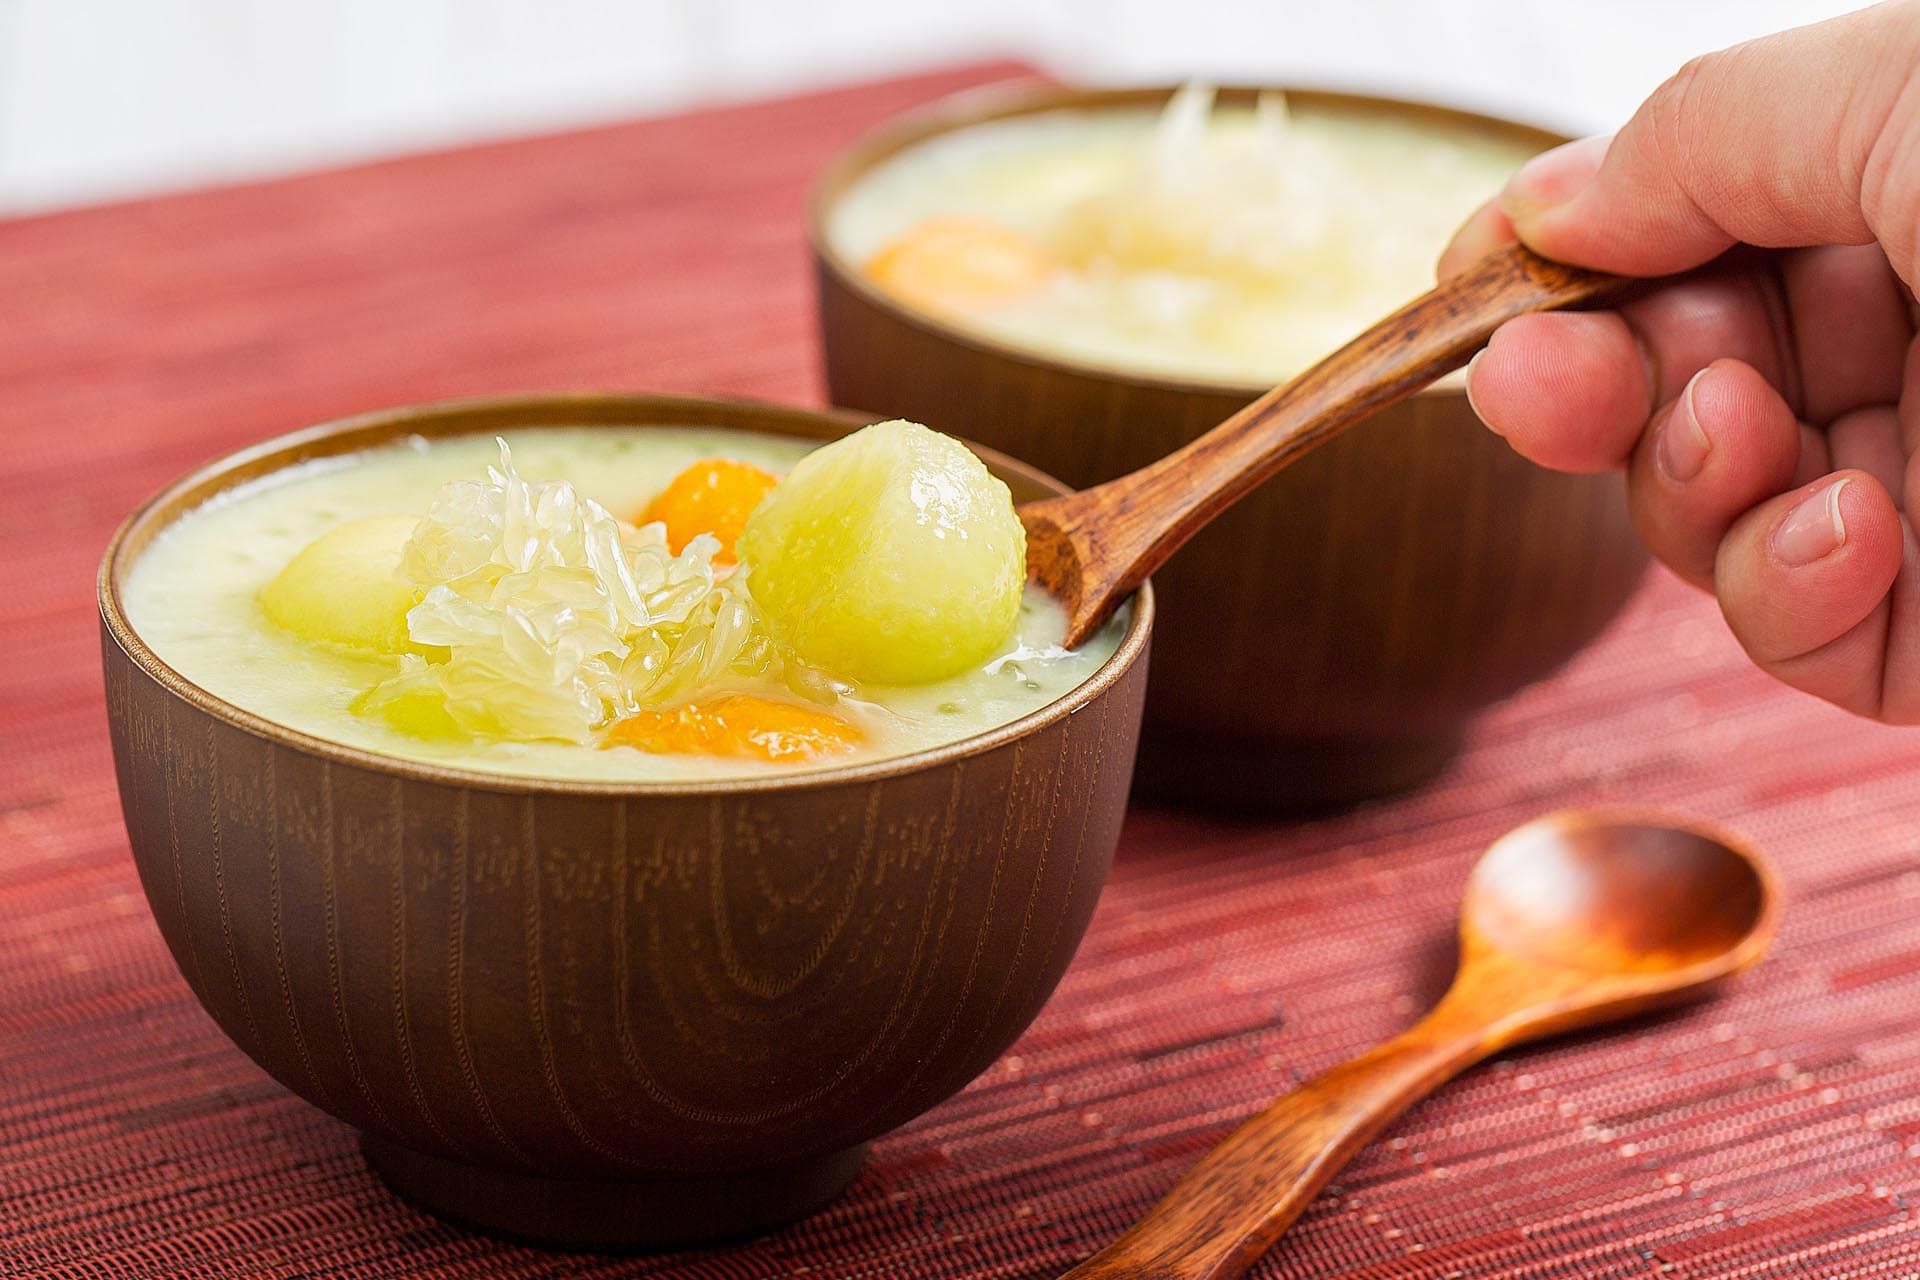 Honeydew Sago Pomelo: Three Healthy Ingredients All Combined Into One Delicious Dessert Dish, We Got Real Lucky